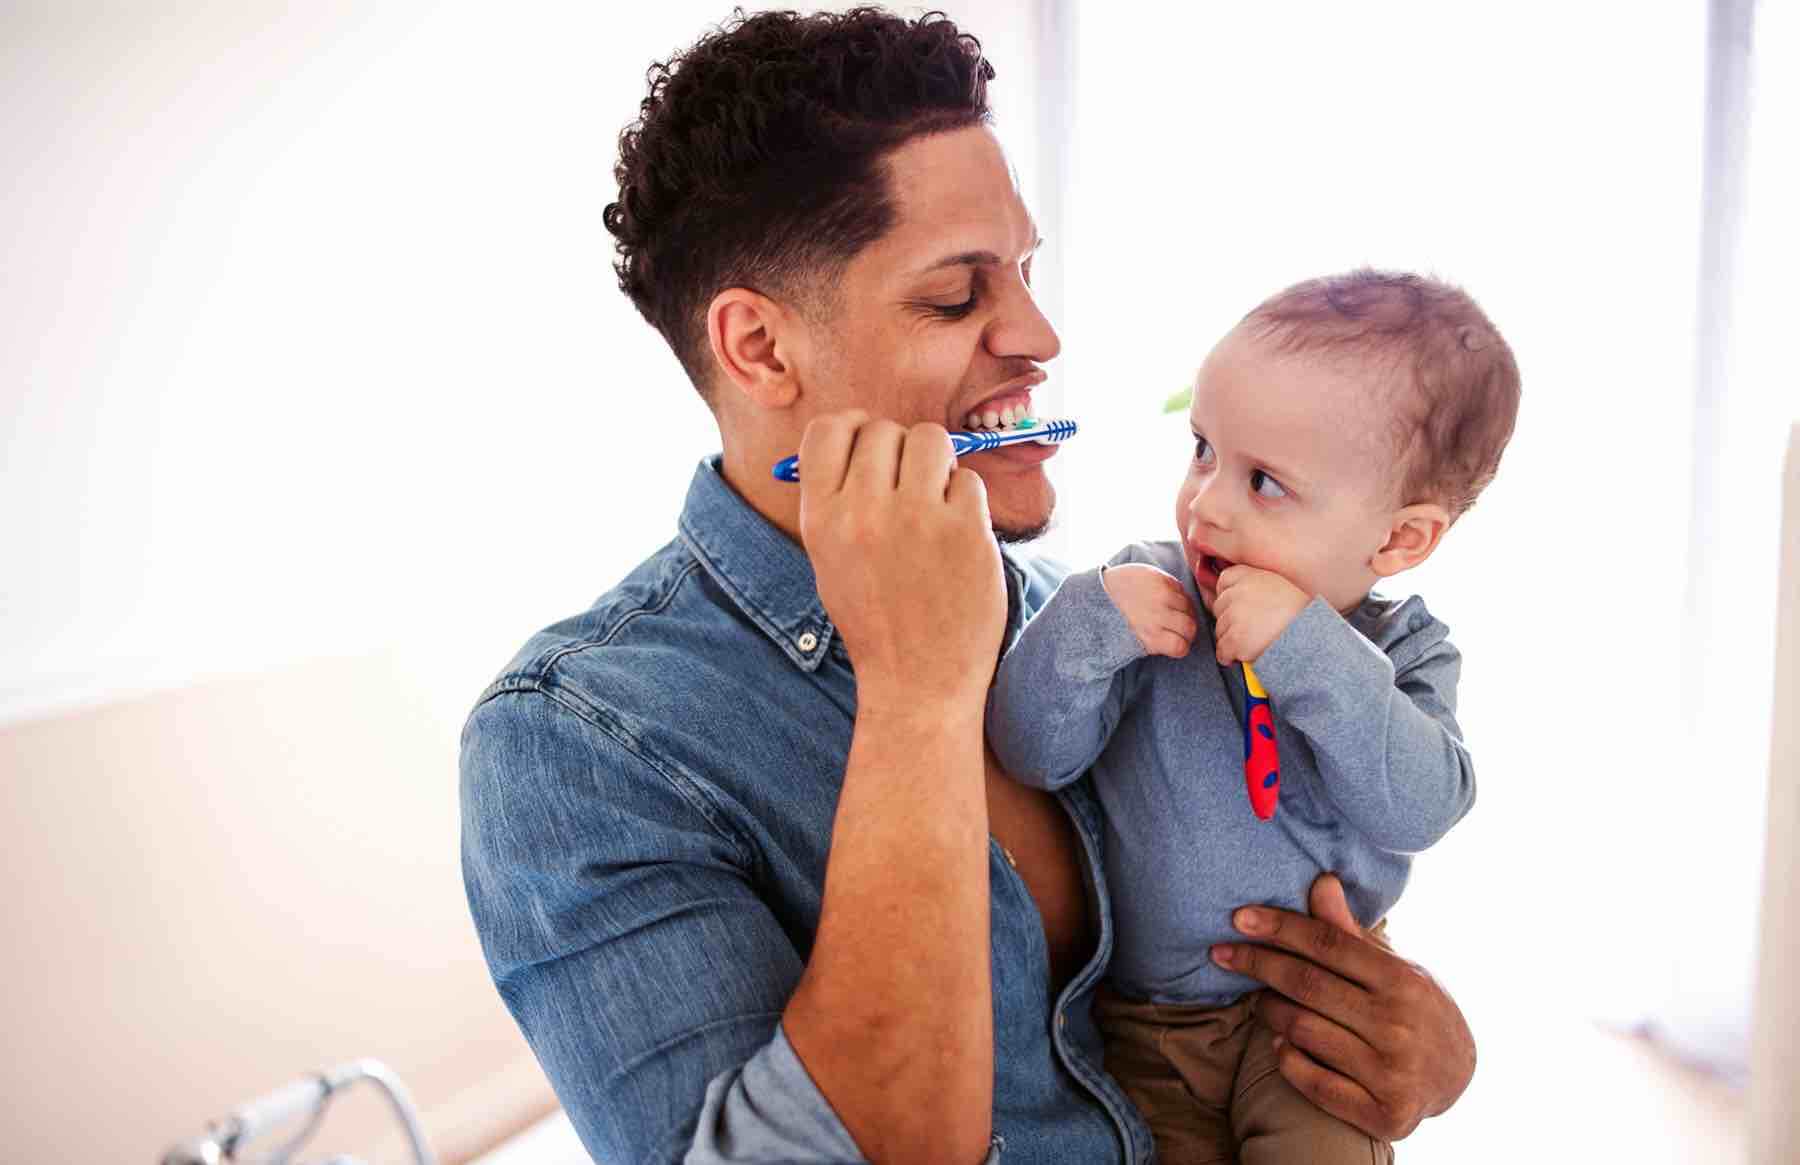 Preventive Dentistry | King Dental in Chicago |  African American father and son brushing teeth together